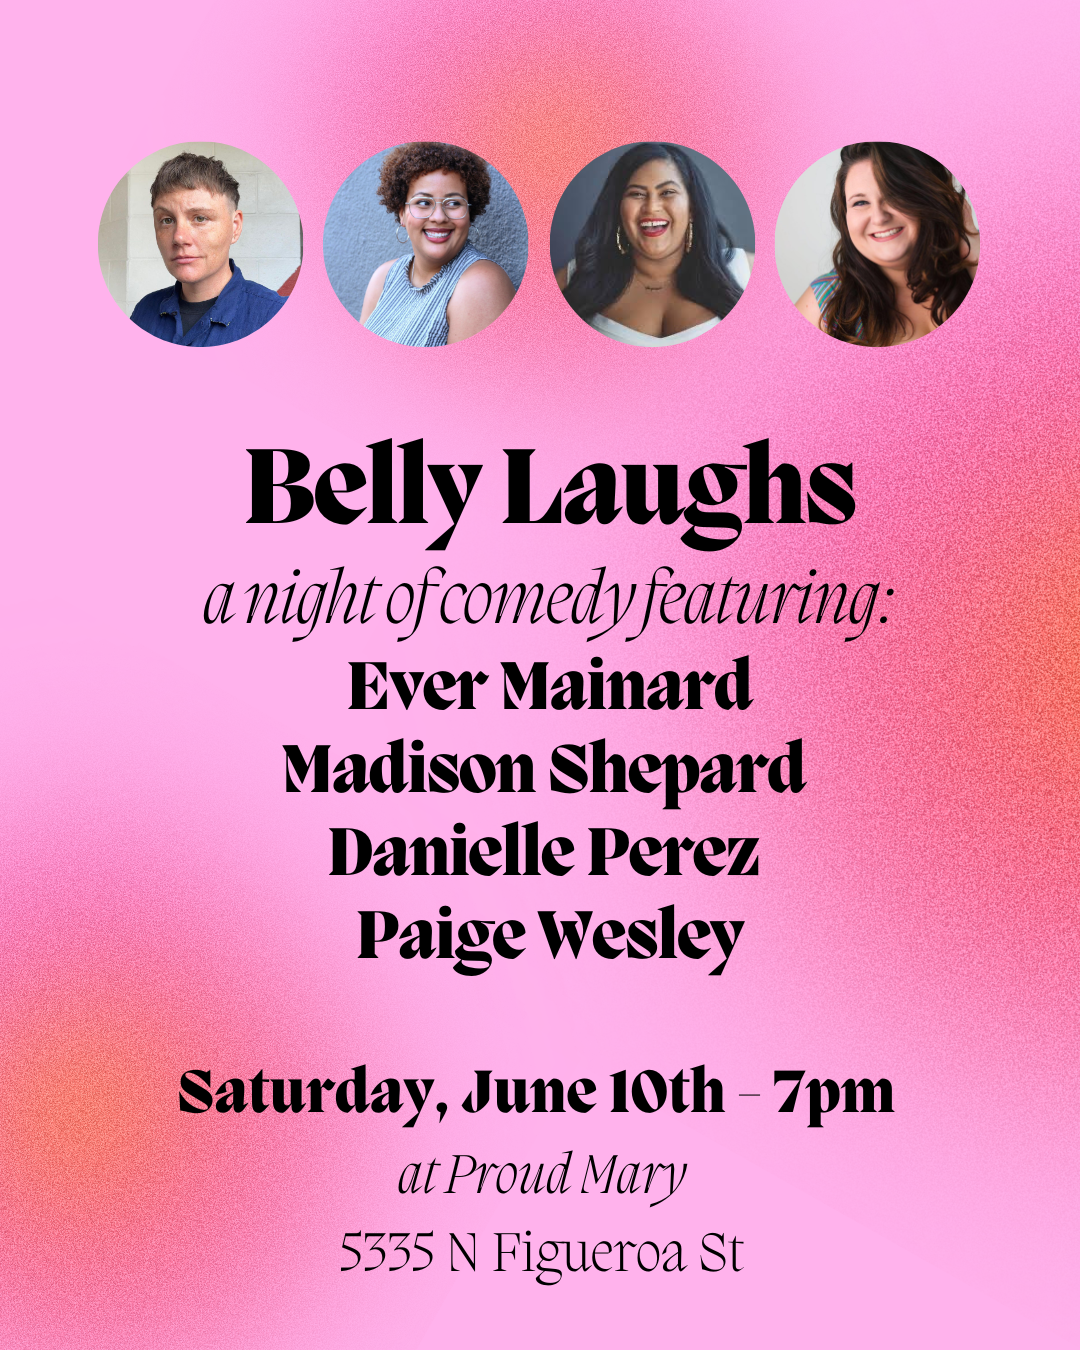 Event ticket: Belly Laughs - A Night of Comedy